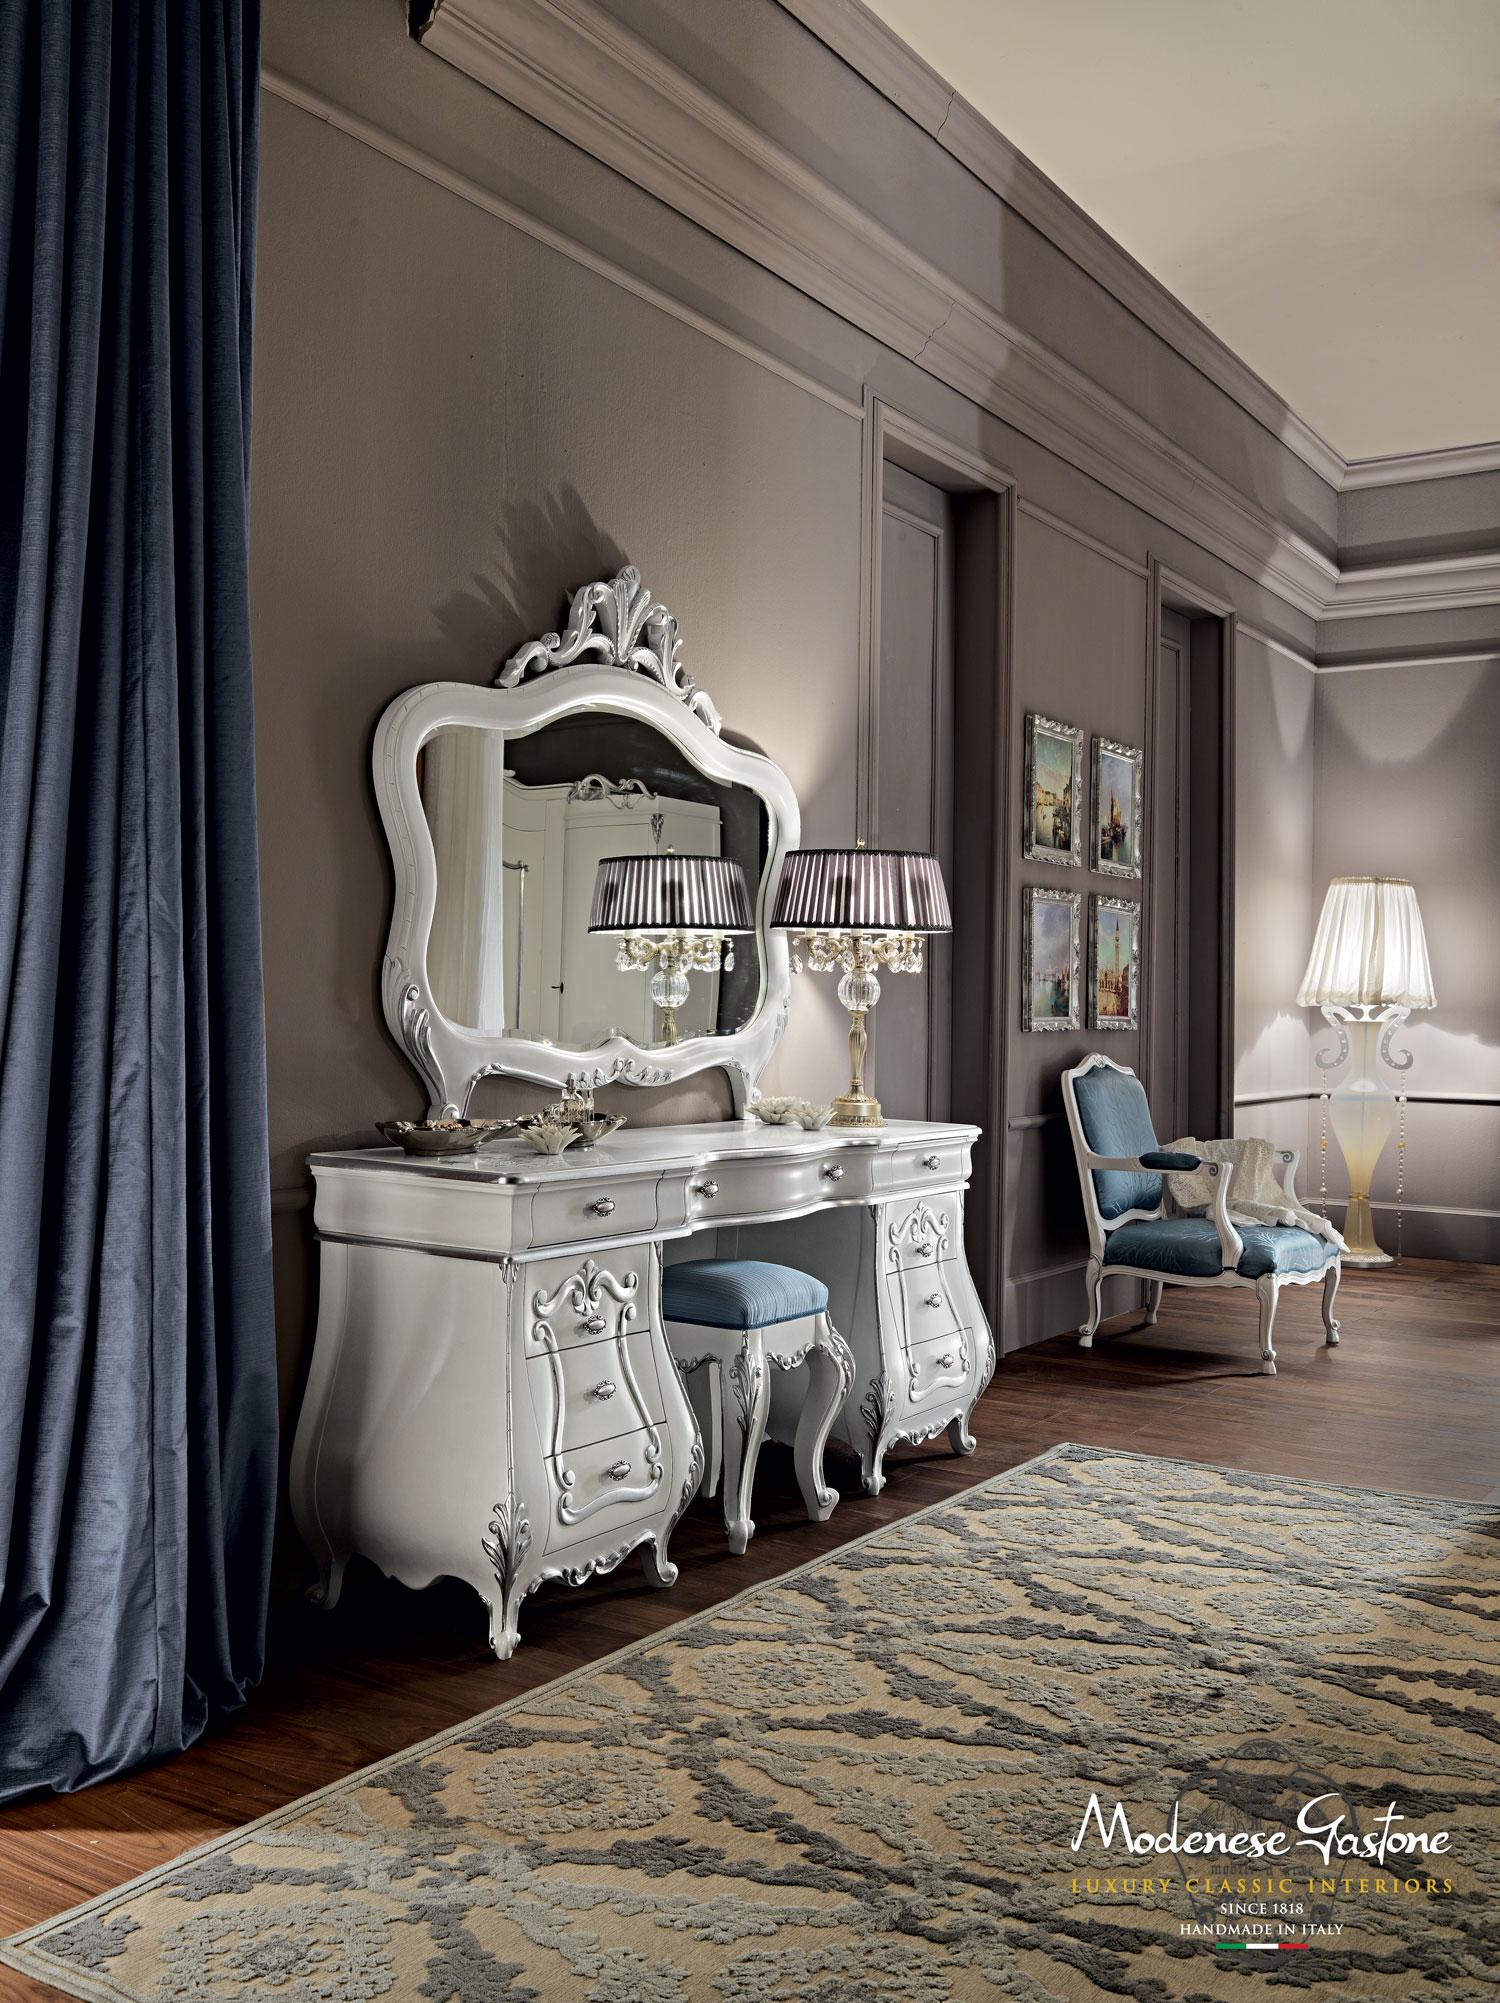 Bespoke baroque make-up table by Modenese Gastone Interiors, Italian furniture producer. The unique elegance of this nine-drawer vanity unit is remarcable when we look at its bombed silhouette, the white lacquered finish and the silver leaf